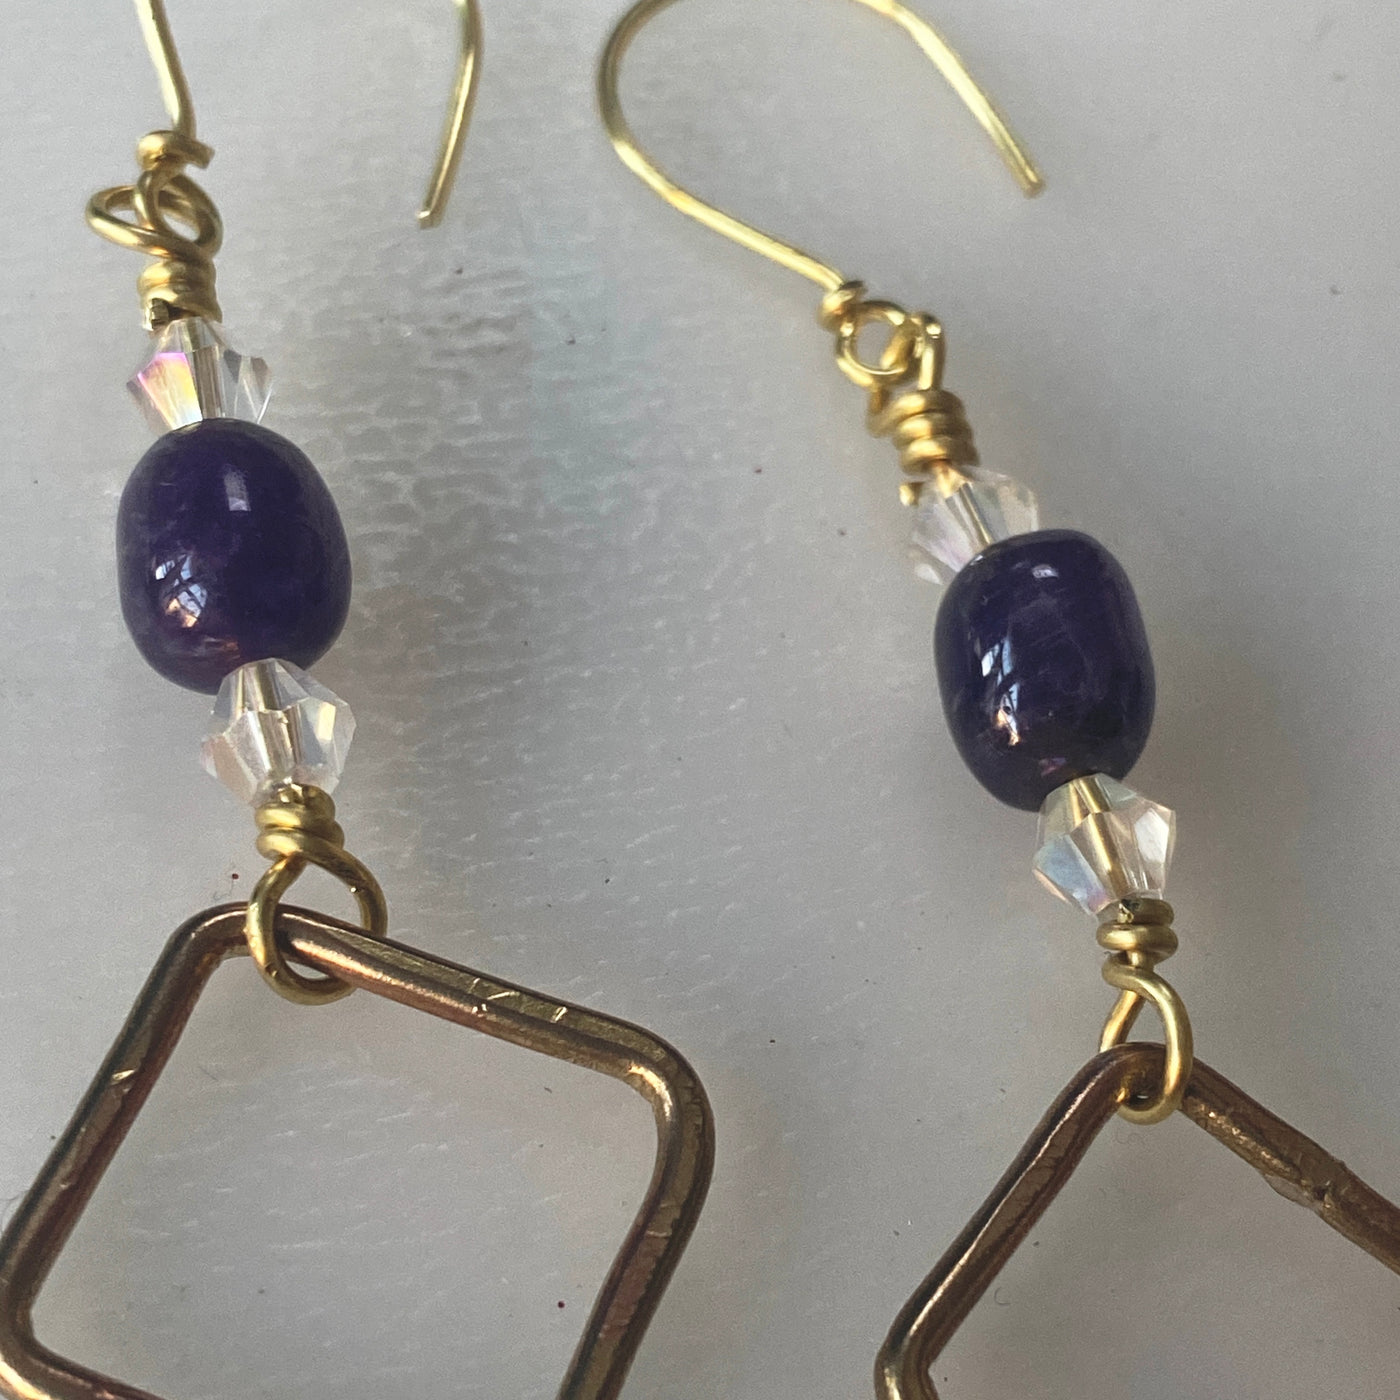 Handmade brass squares with amethyst and Chrystal's earrings 9 cm long